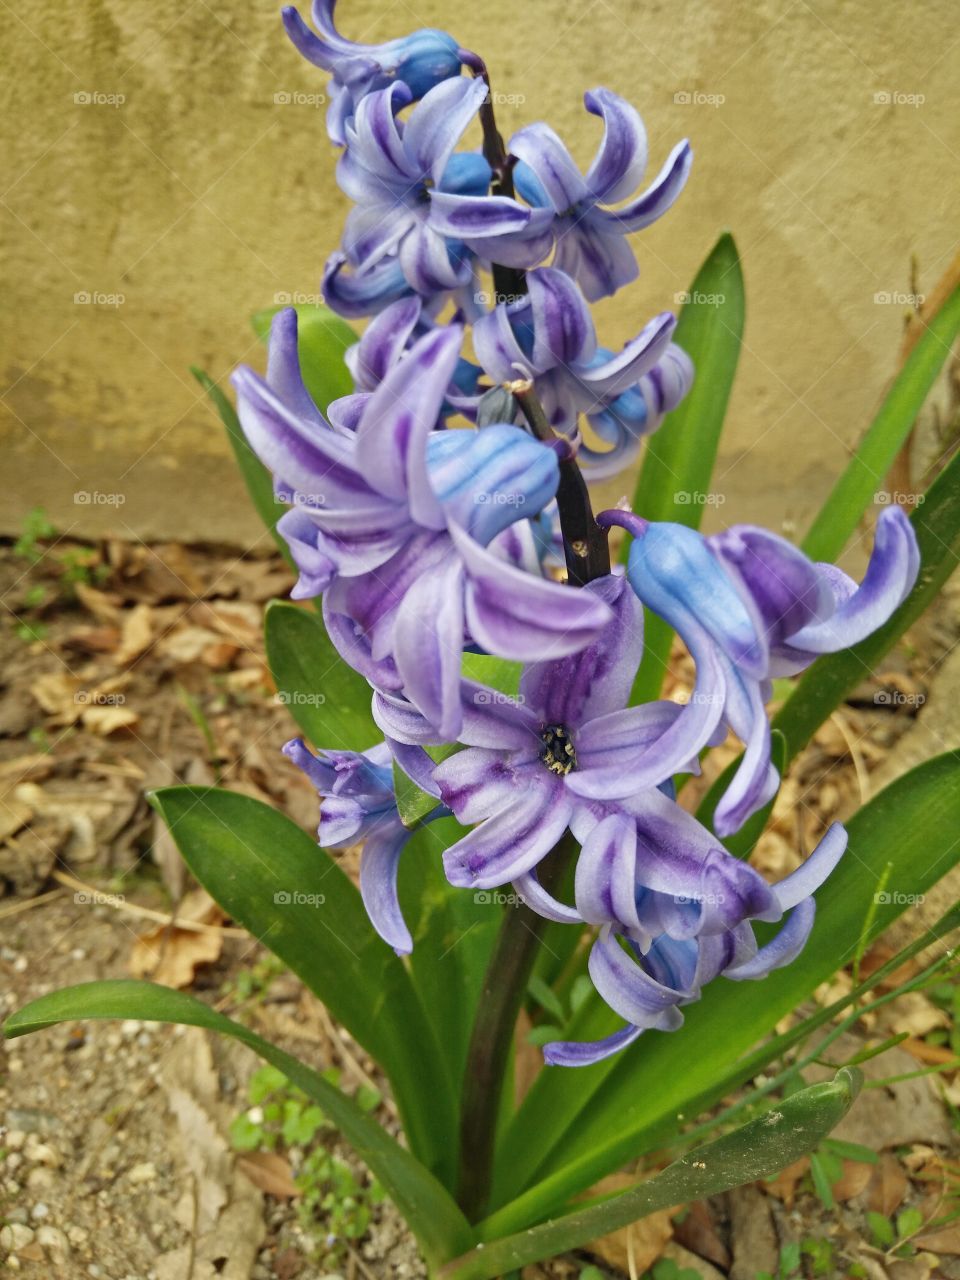 a colorful purple hyacinth flower in bloom in springtime